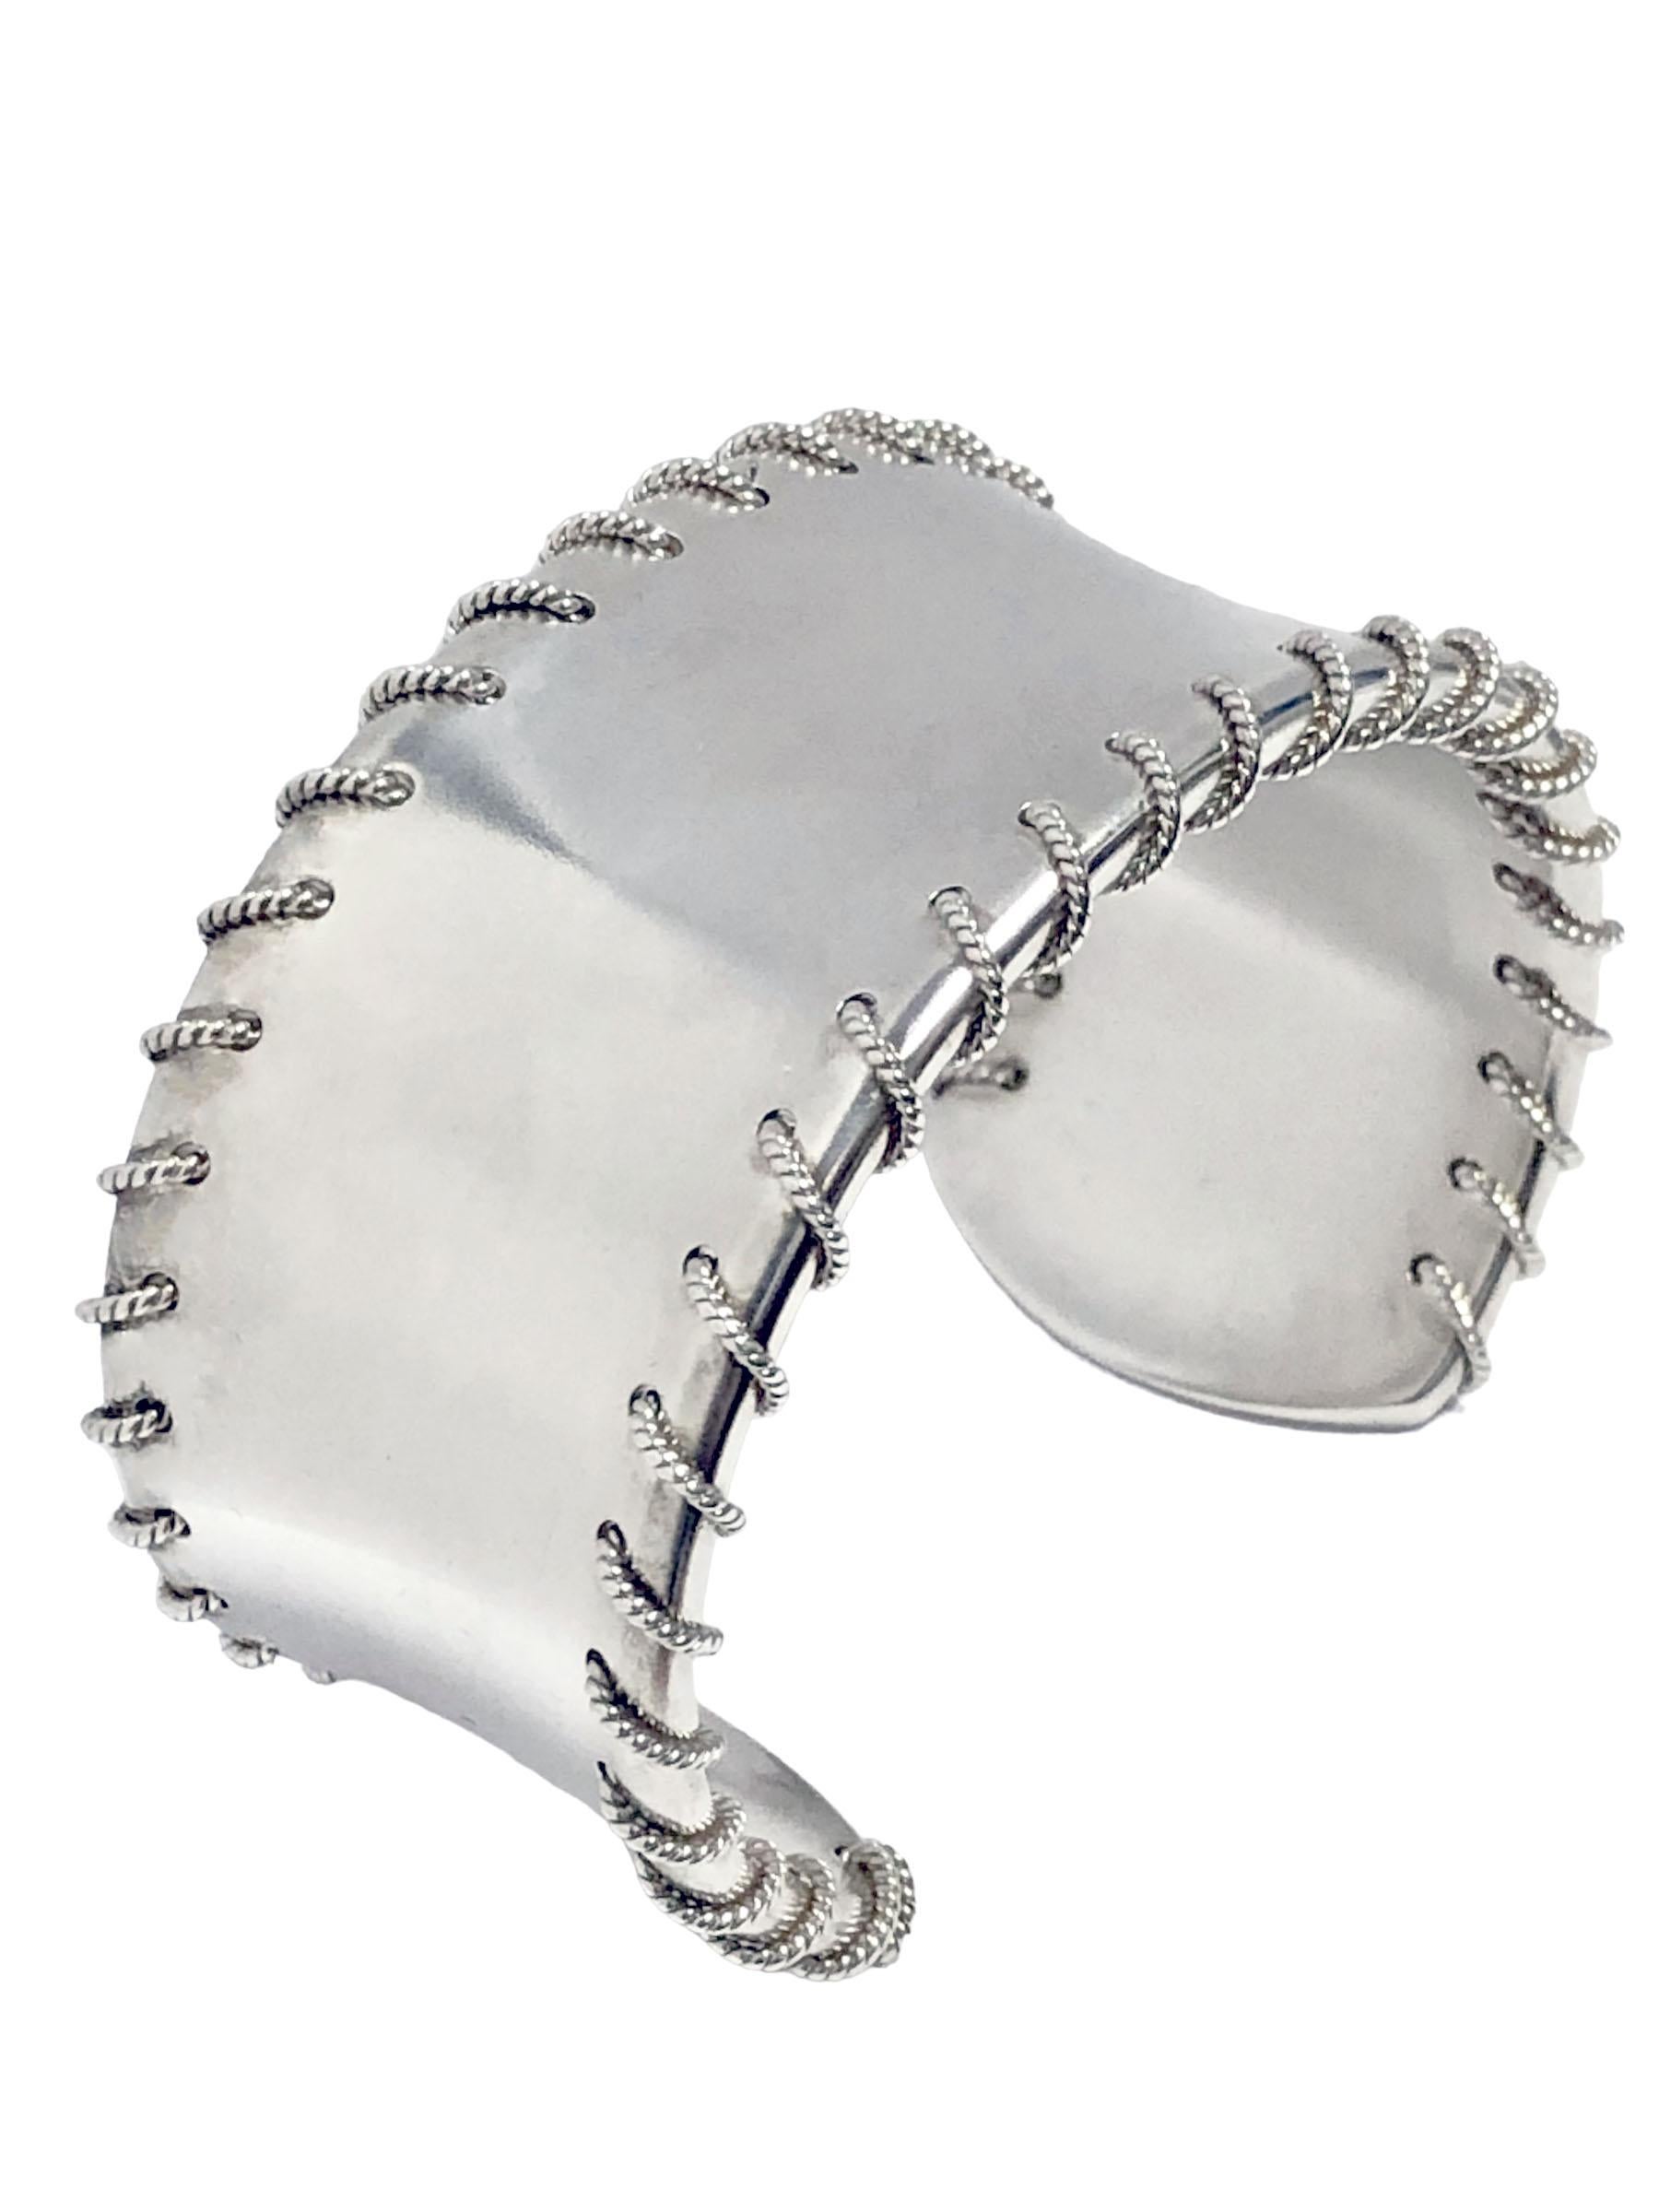 Circa 2001 Tiffany & Company Sterling Silver Cuff Bracelet with threaded Rope Design. Measuring 1 1/4 Inch wide with an opening of 1 inch that is adjustable so this bracelet will fit most any wrist. Comes in original Tiffany pouch.